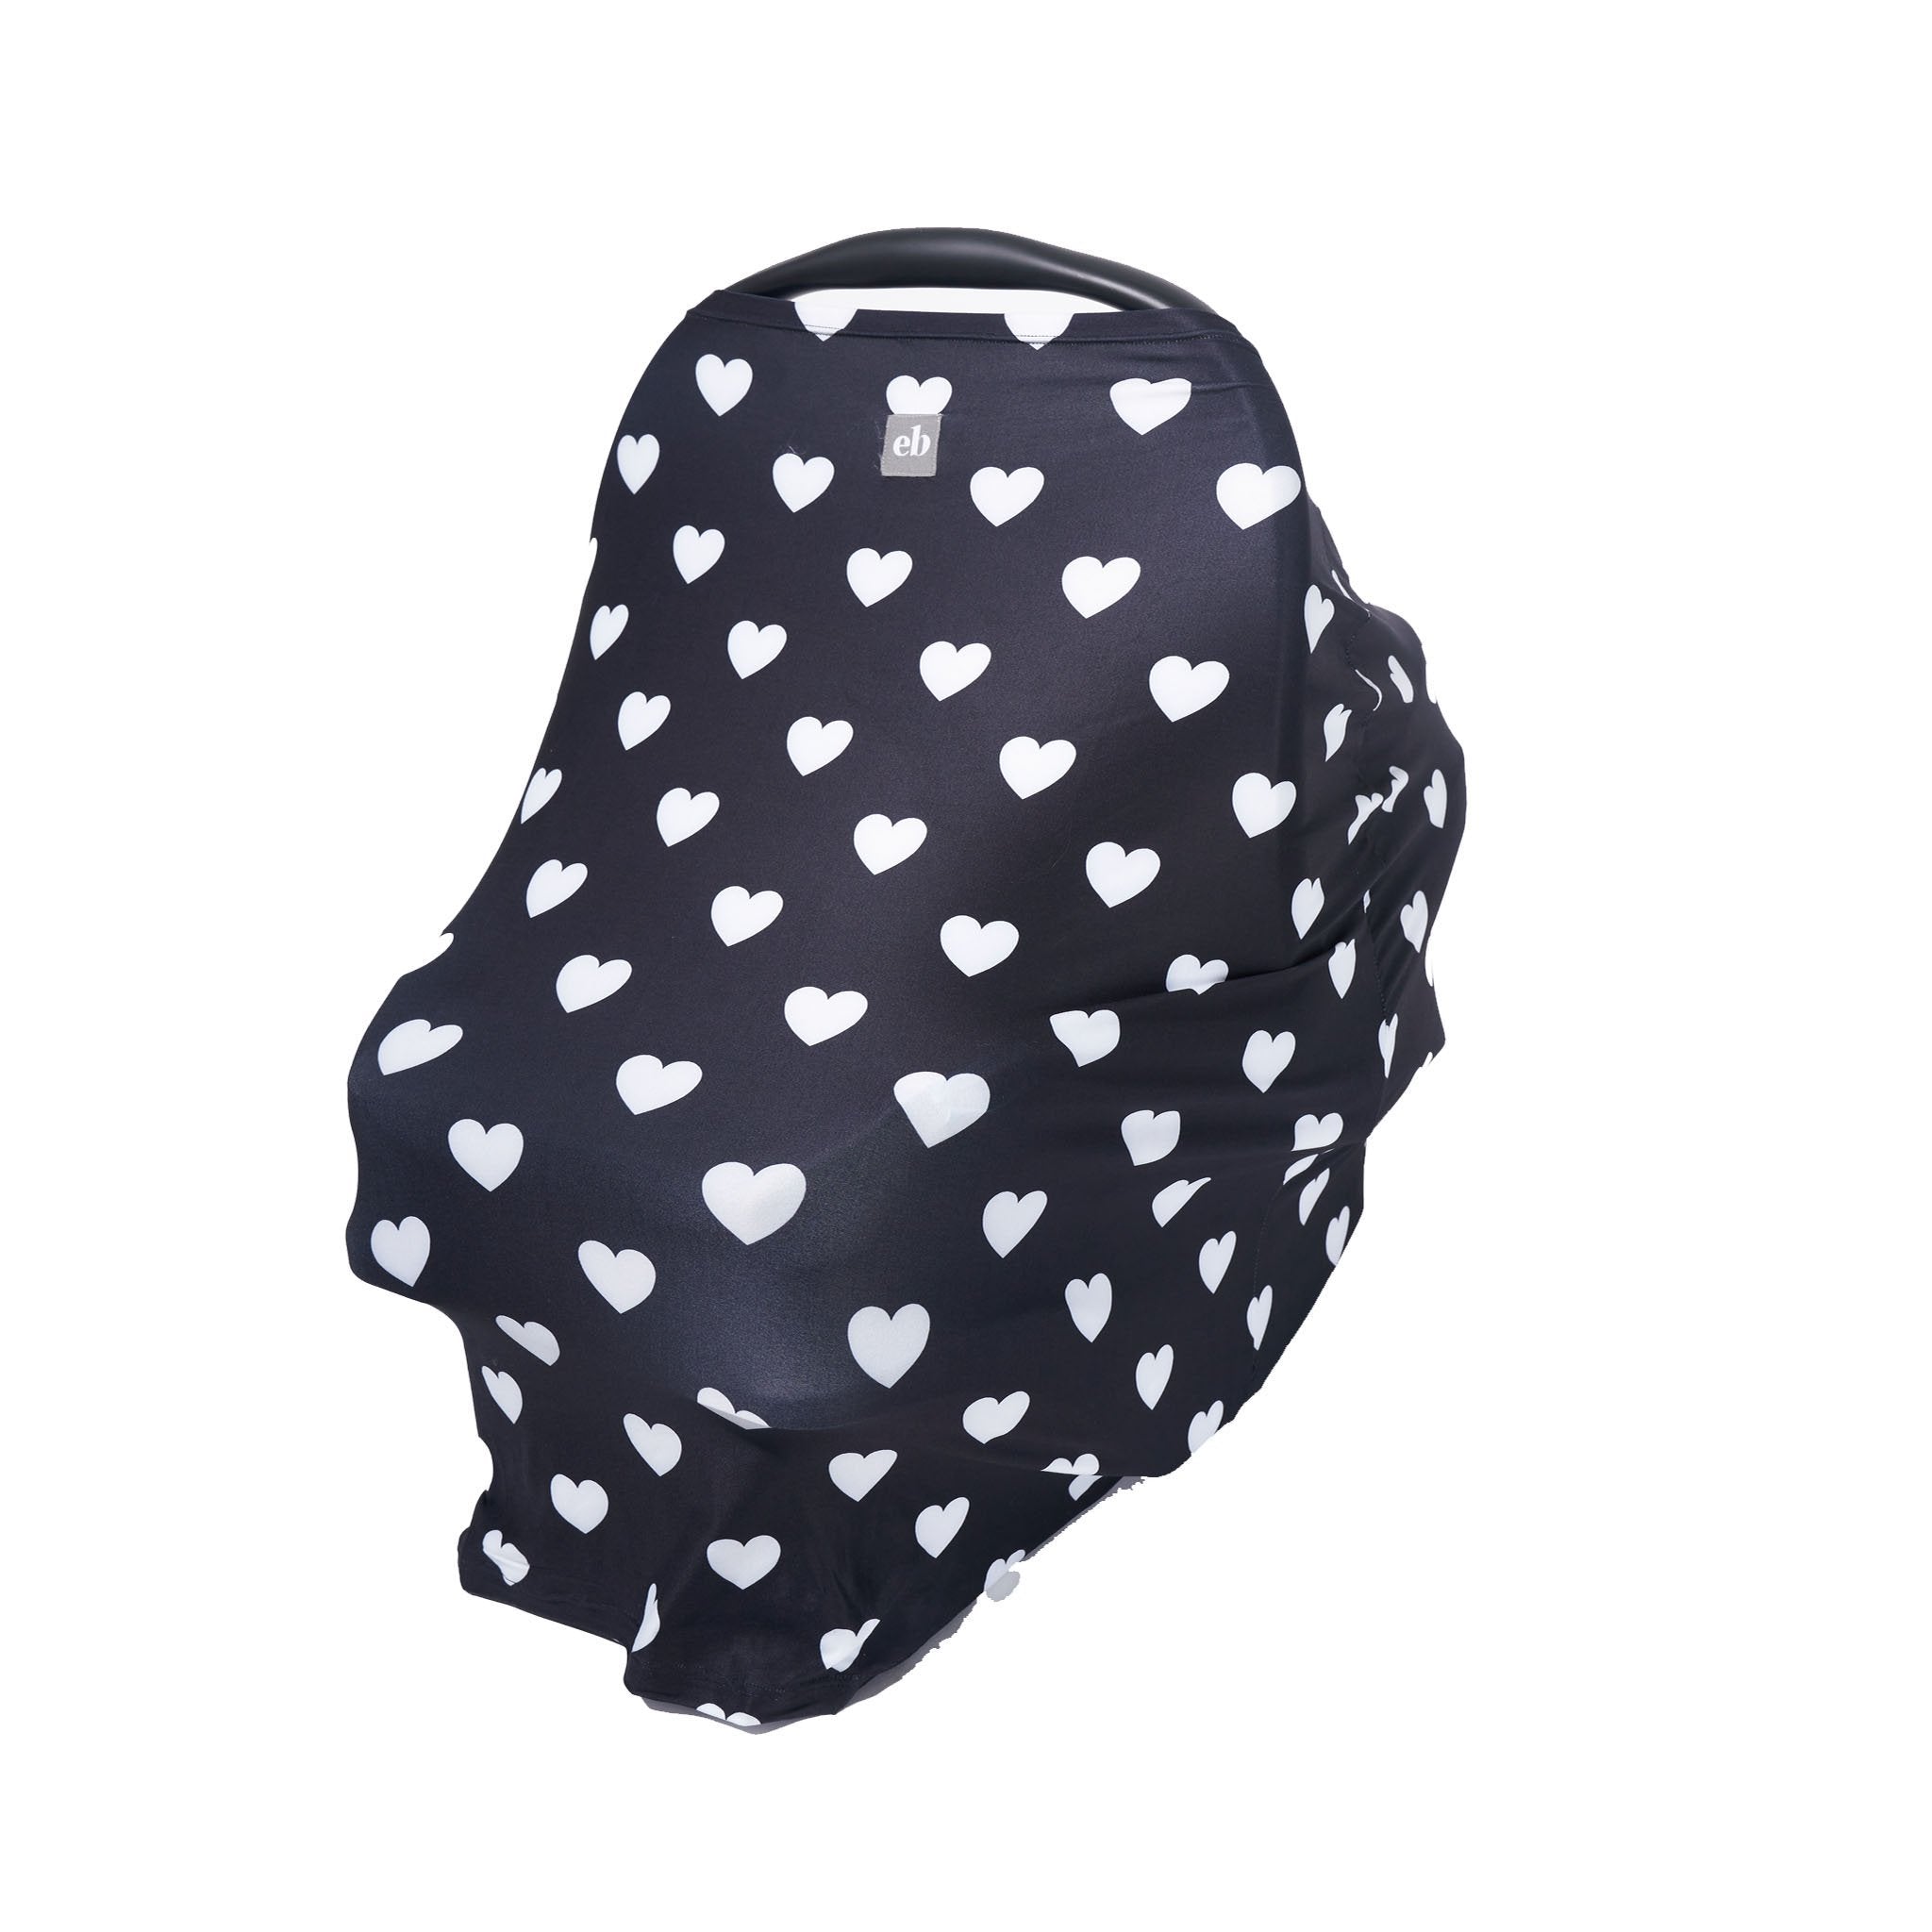 Breathable Nursing Cover | Travel Essential Shopping Cart Cover | Multi-Use Breastfeeding Cover | Functional High Chair Cover | Infinity Scarf | Black and White Heart Print - EliteBaby